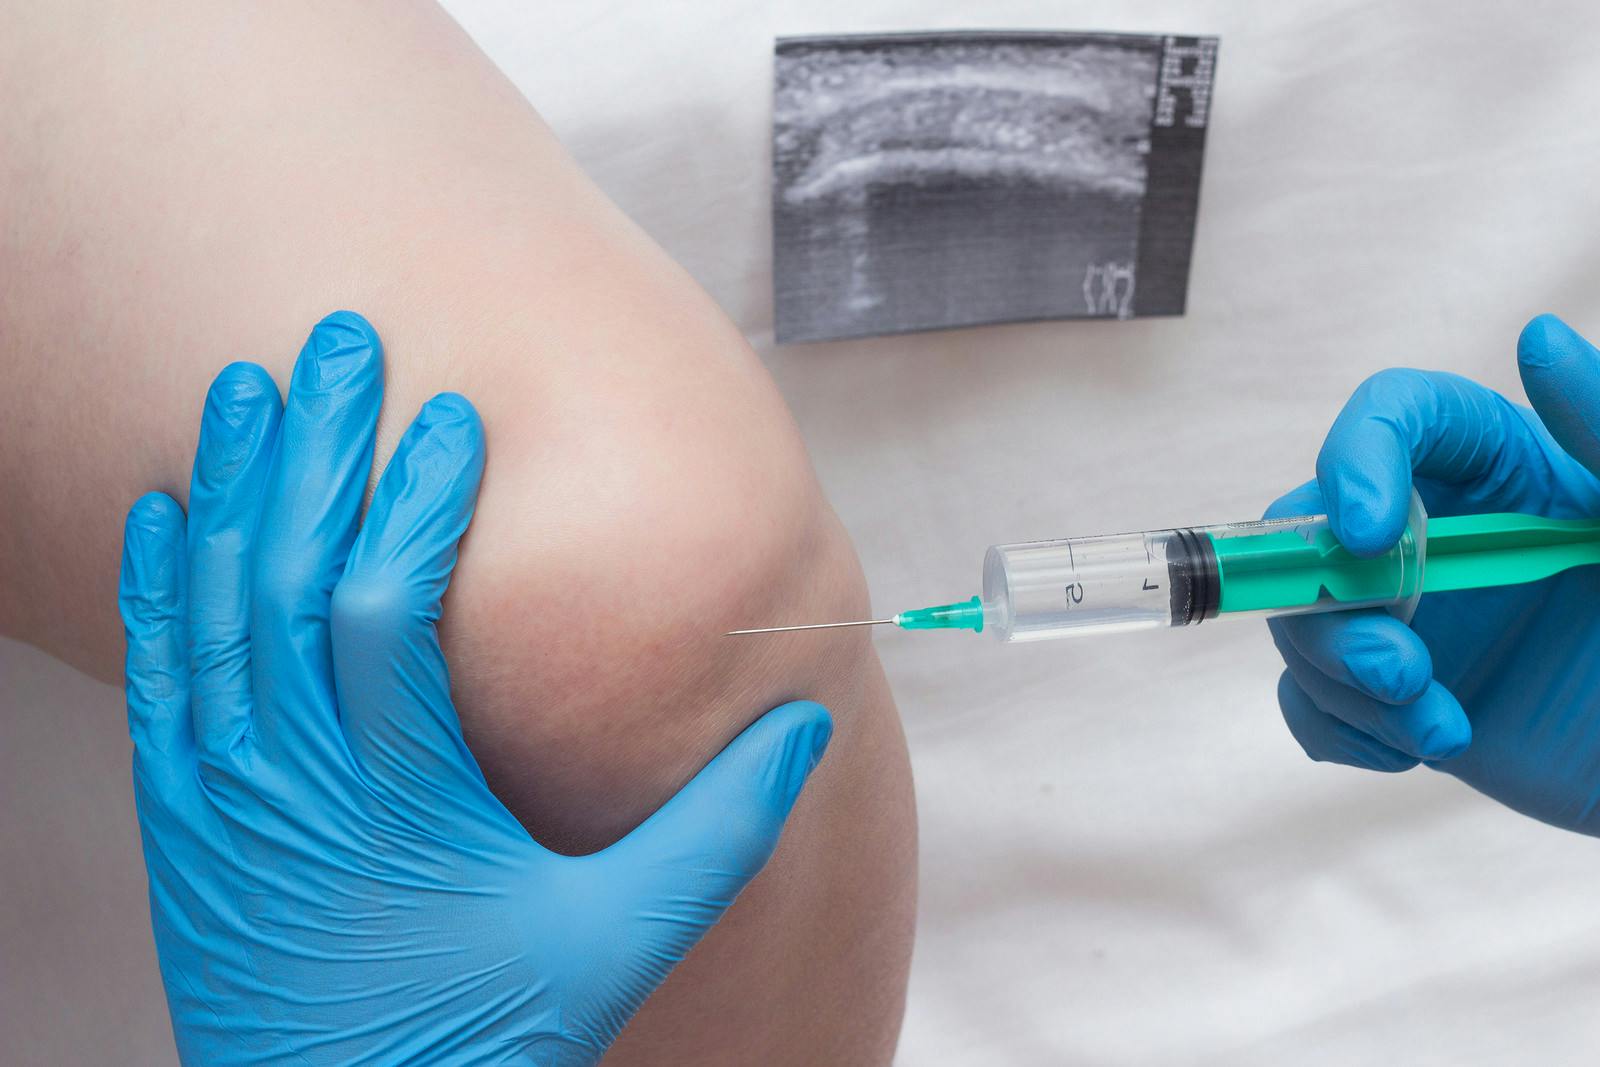 A doctor injects a medical injection of chondroprotector and hyaluronic acid into the knee of a woman to restore the knee joint, cartilage and synovial fluid, close-up
